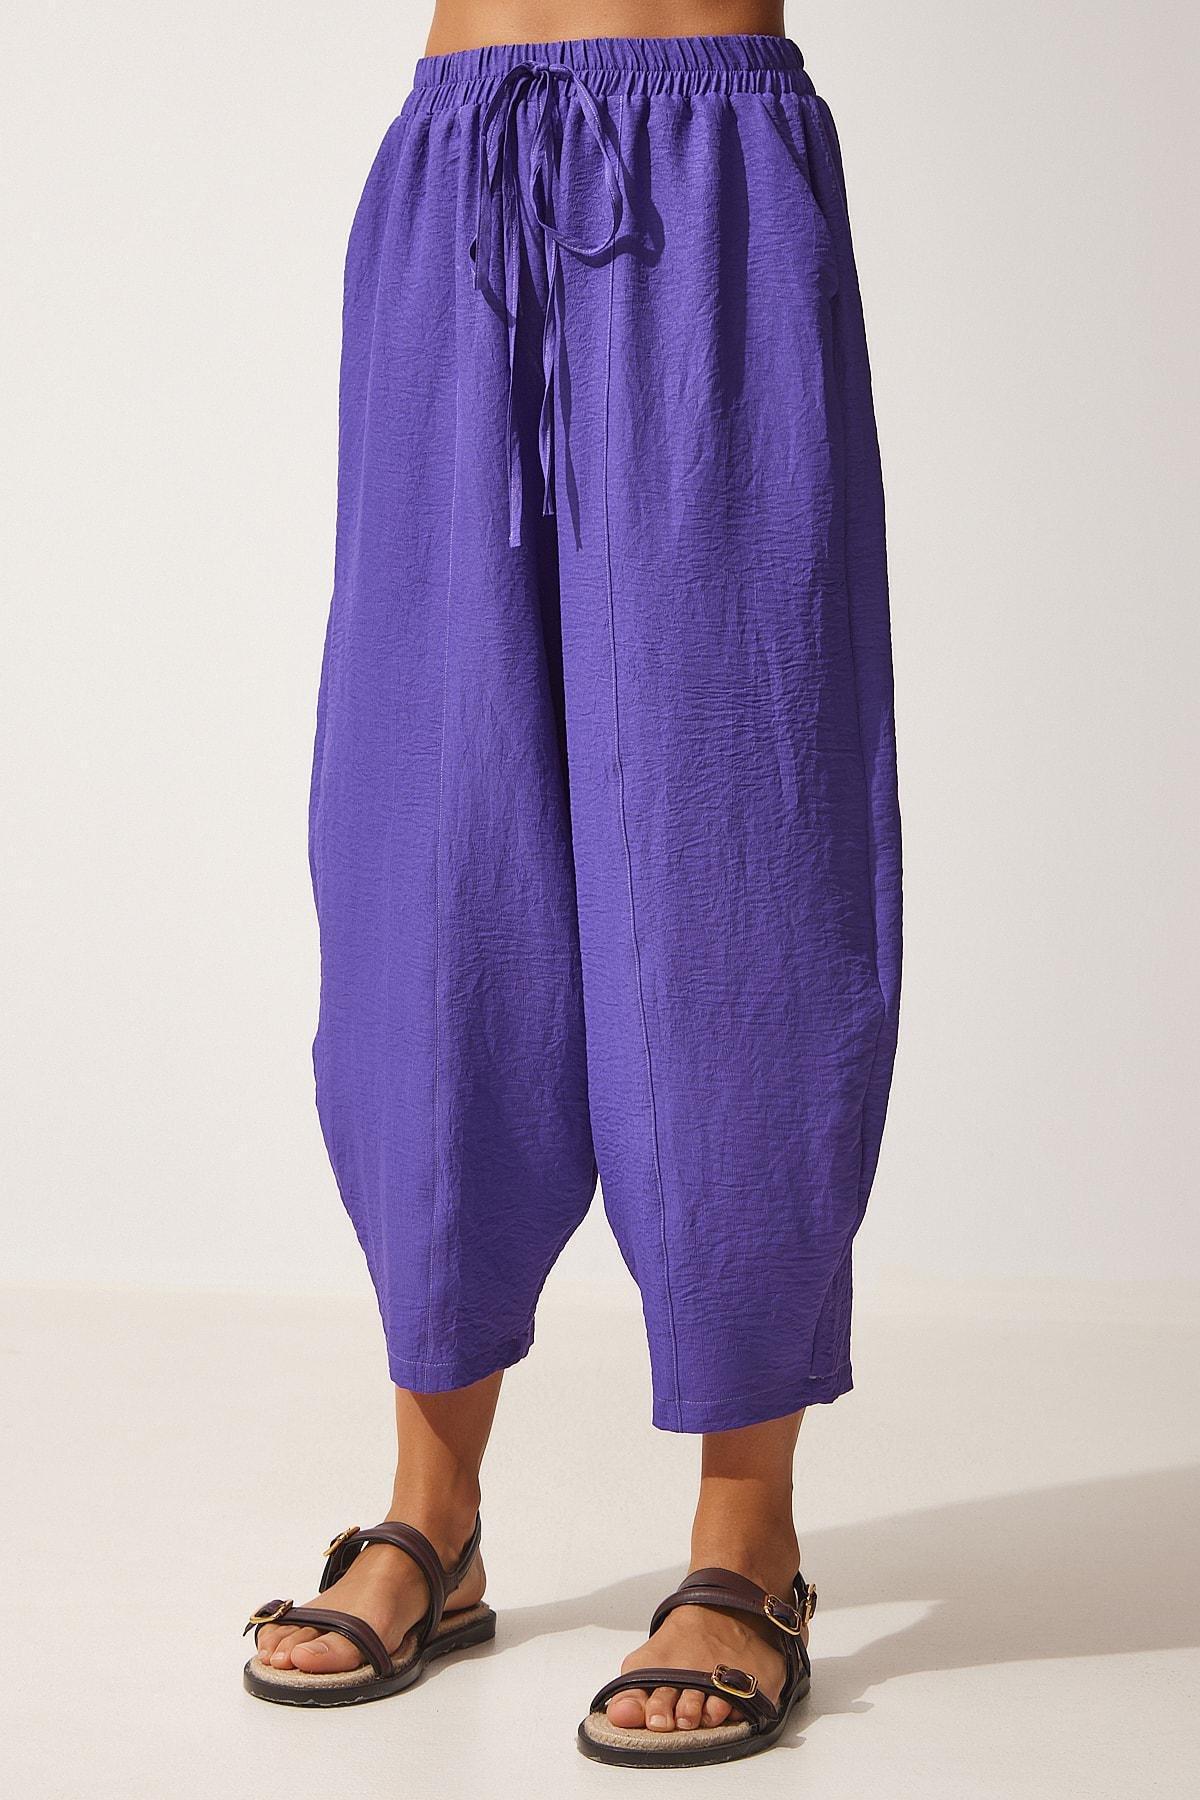 Happiness Istanbul - Purple Pocketed Auxiliary Shalwar Trousers